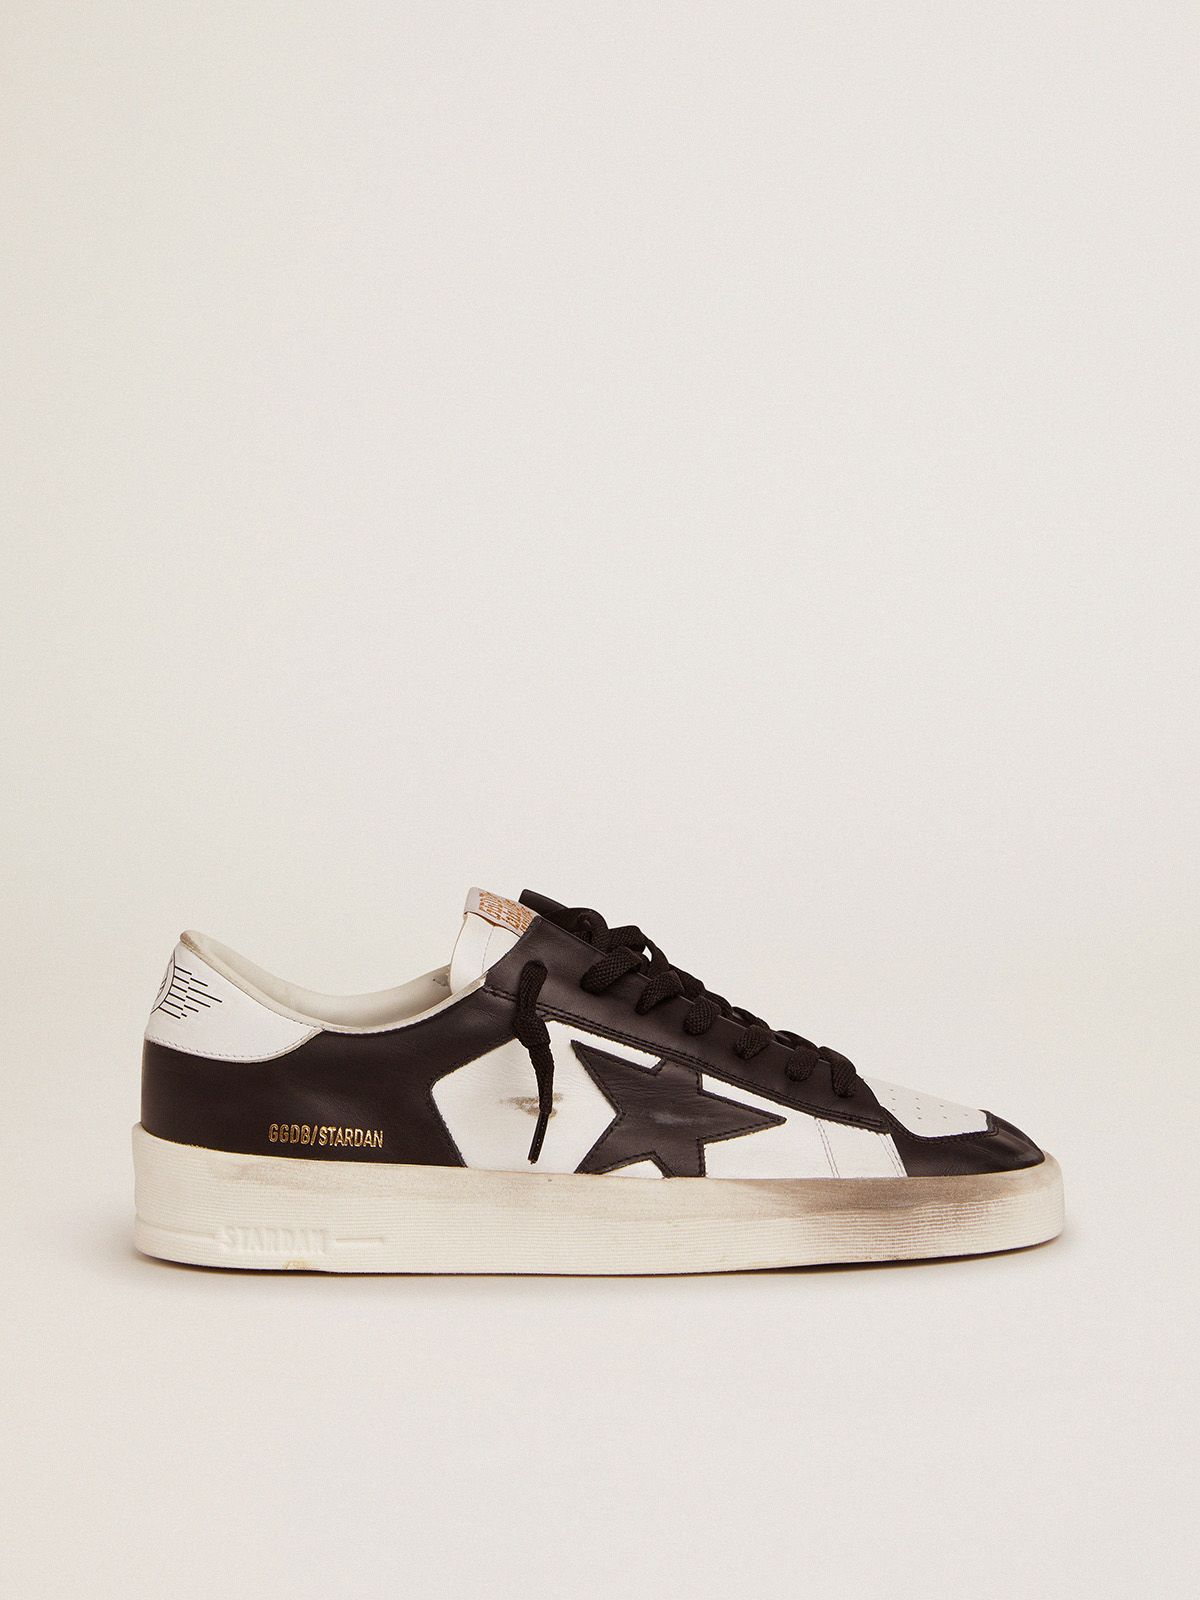 Stardan sneakers in black and white leather | 